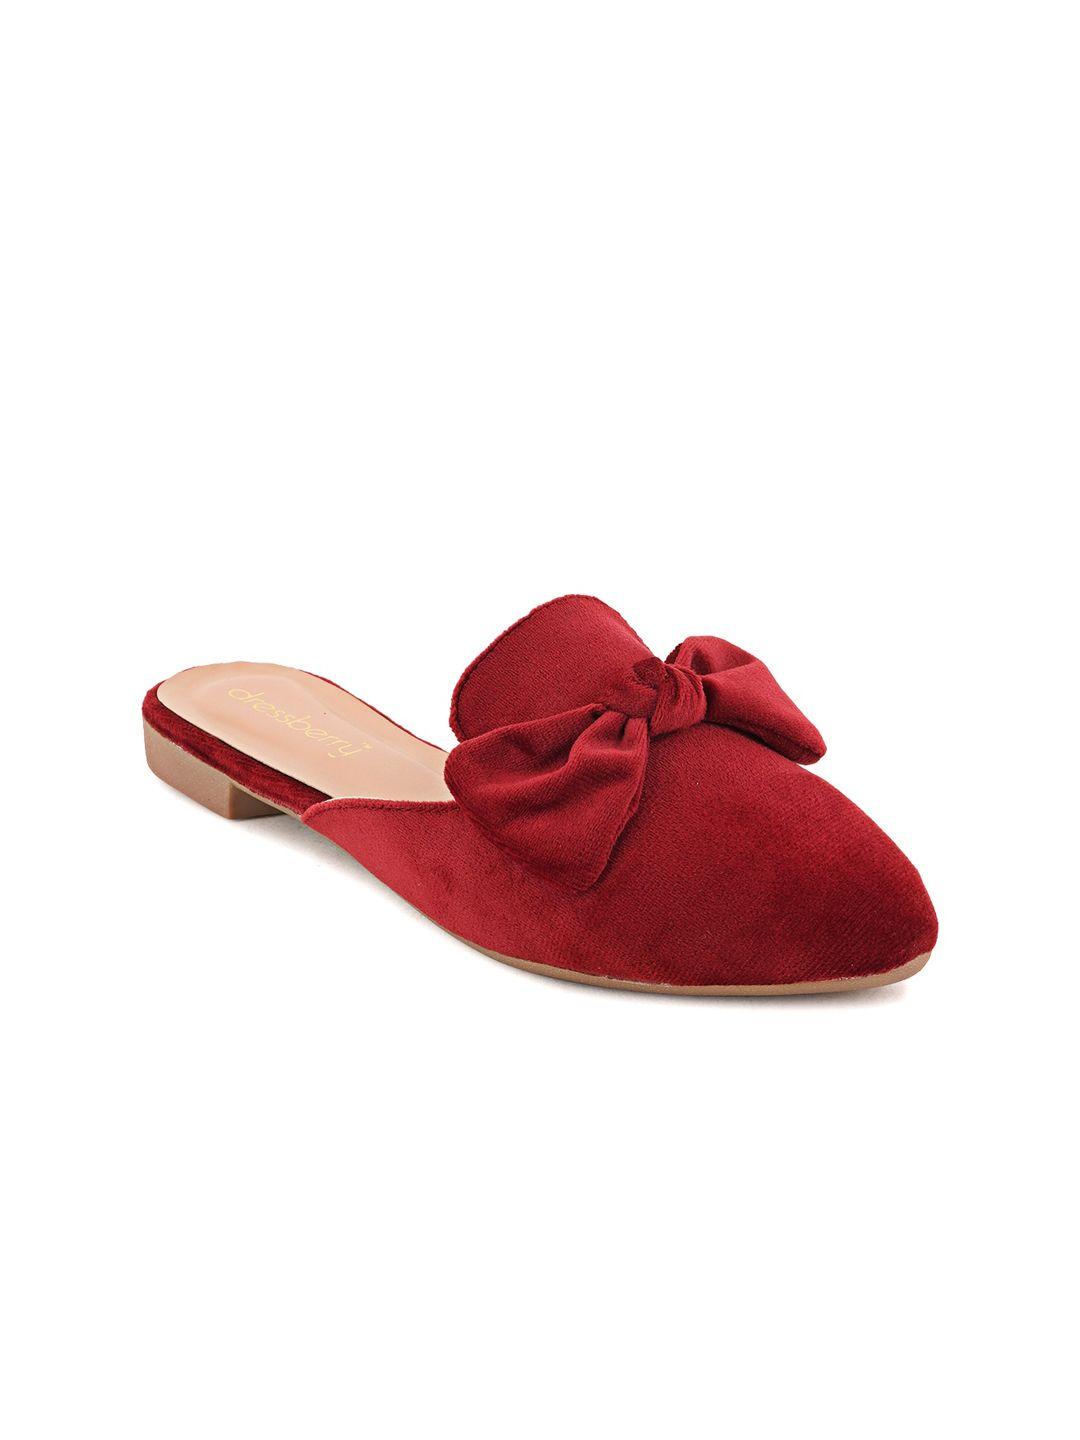 dressberry maroon bow embellished mules